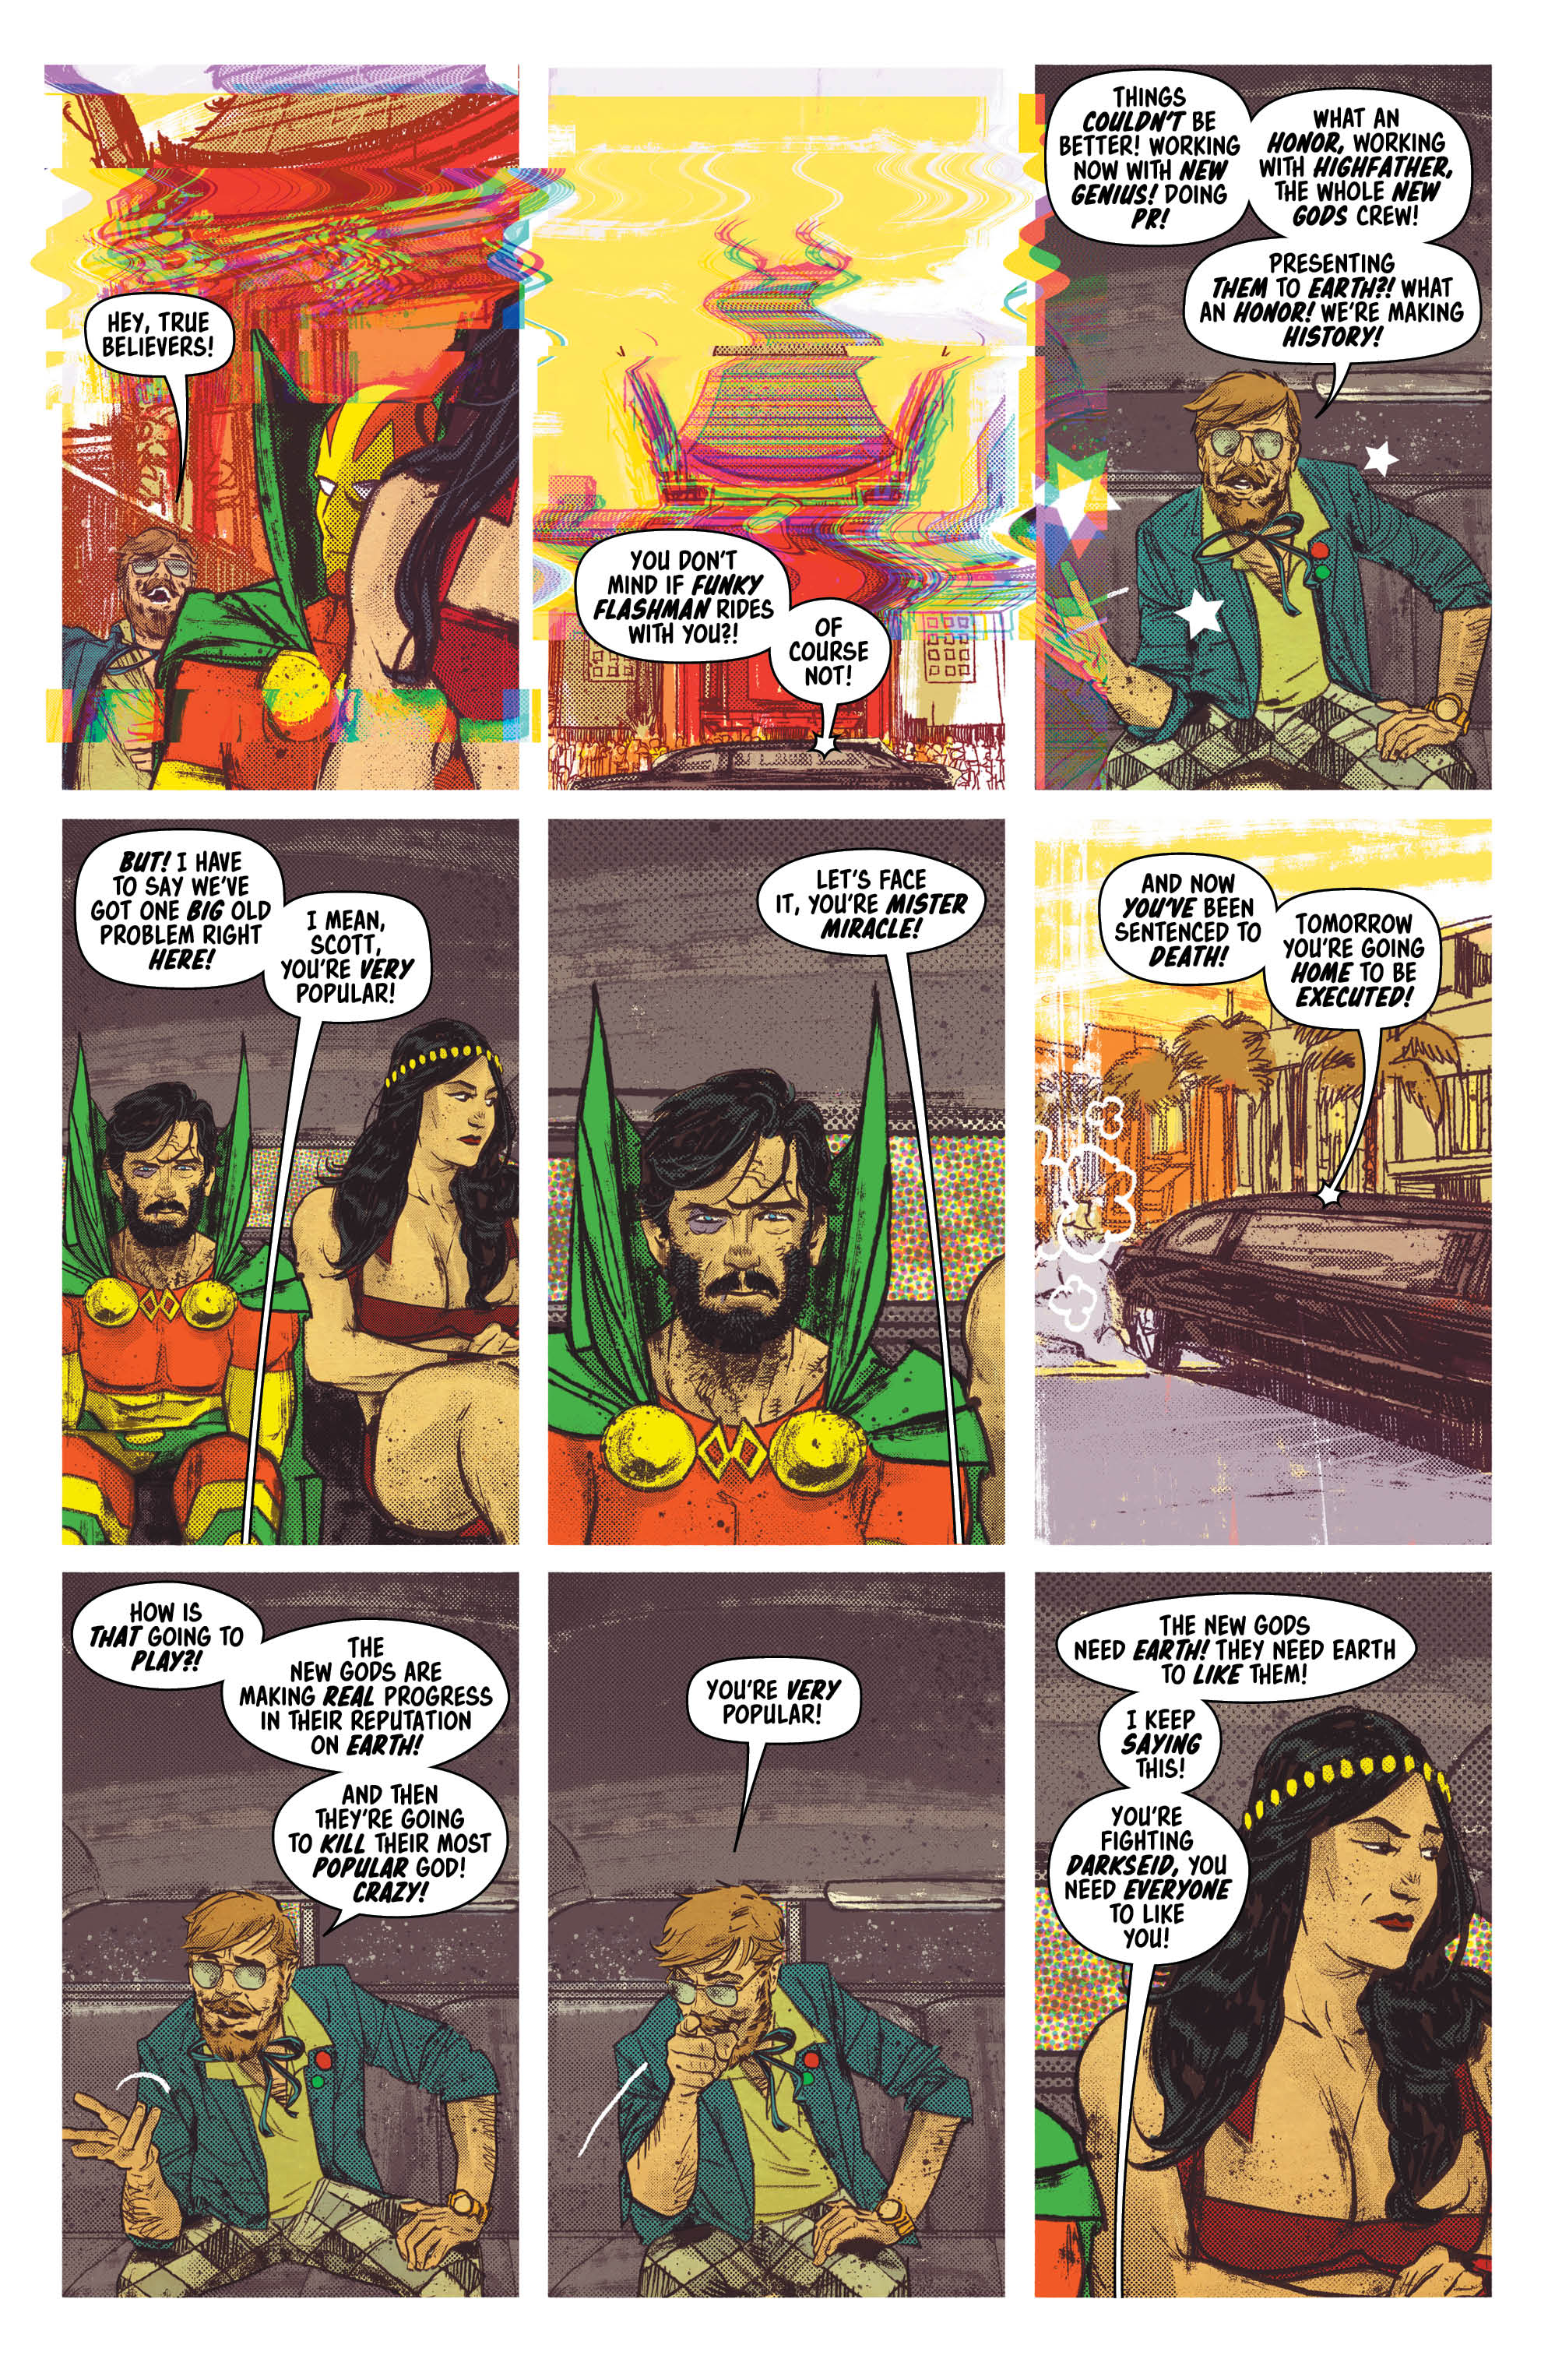 Mister Miracle #5